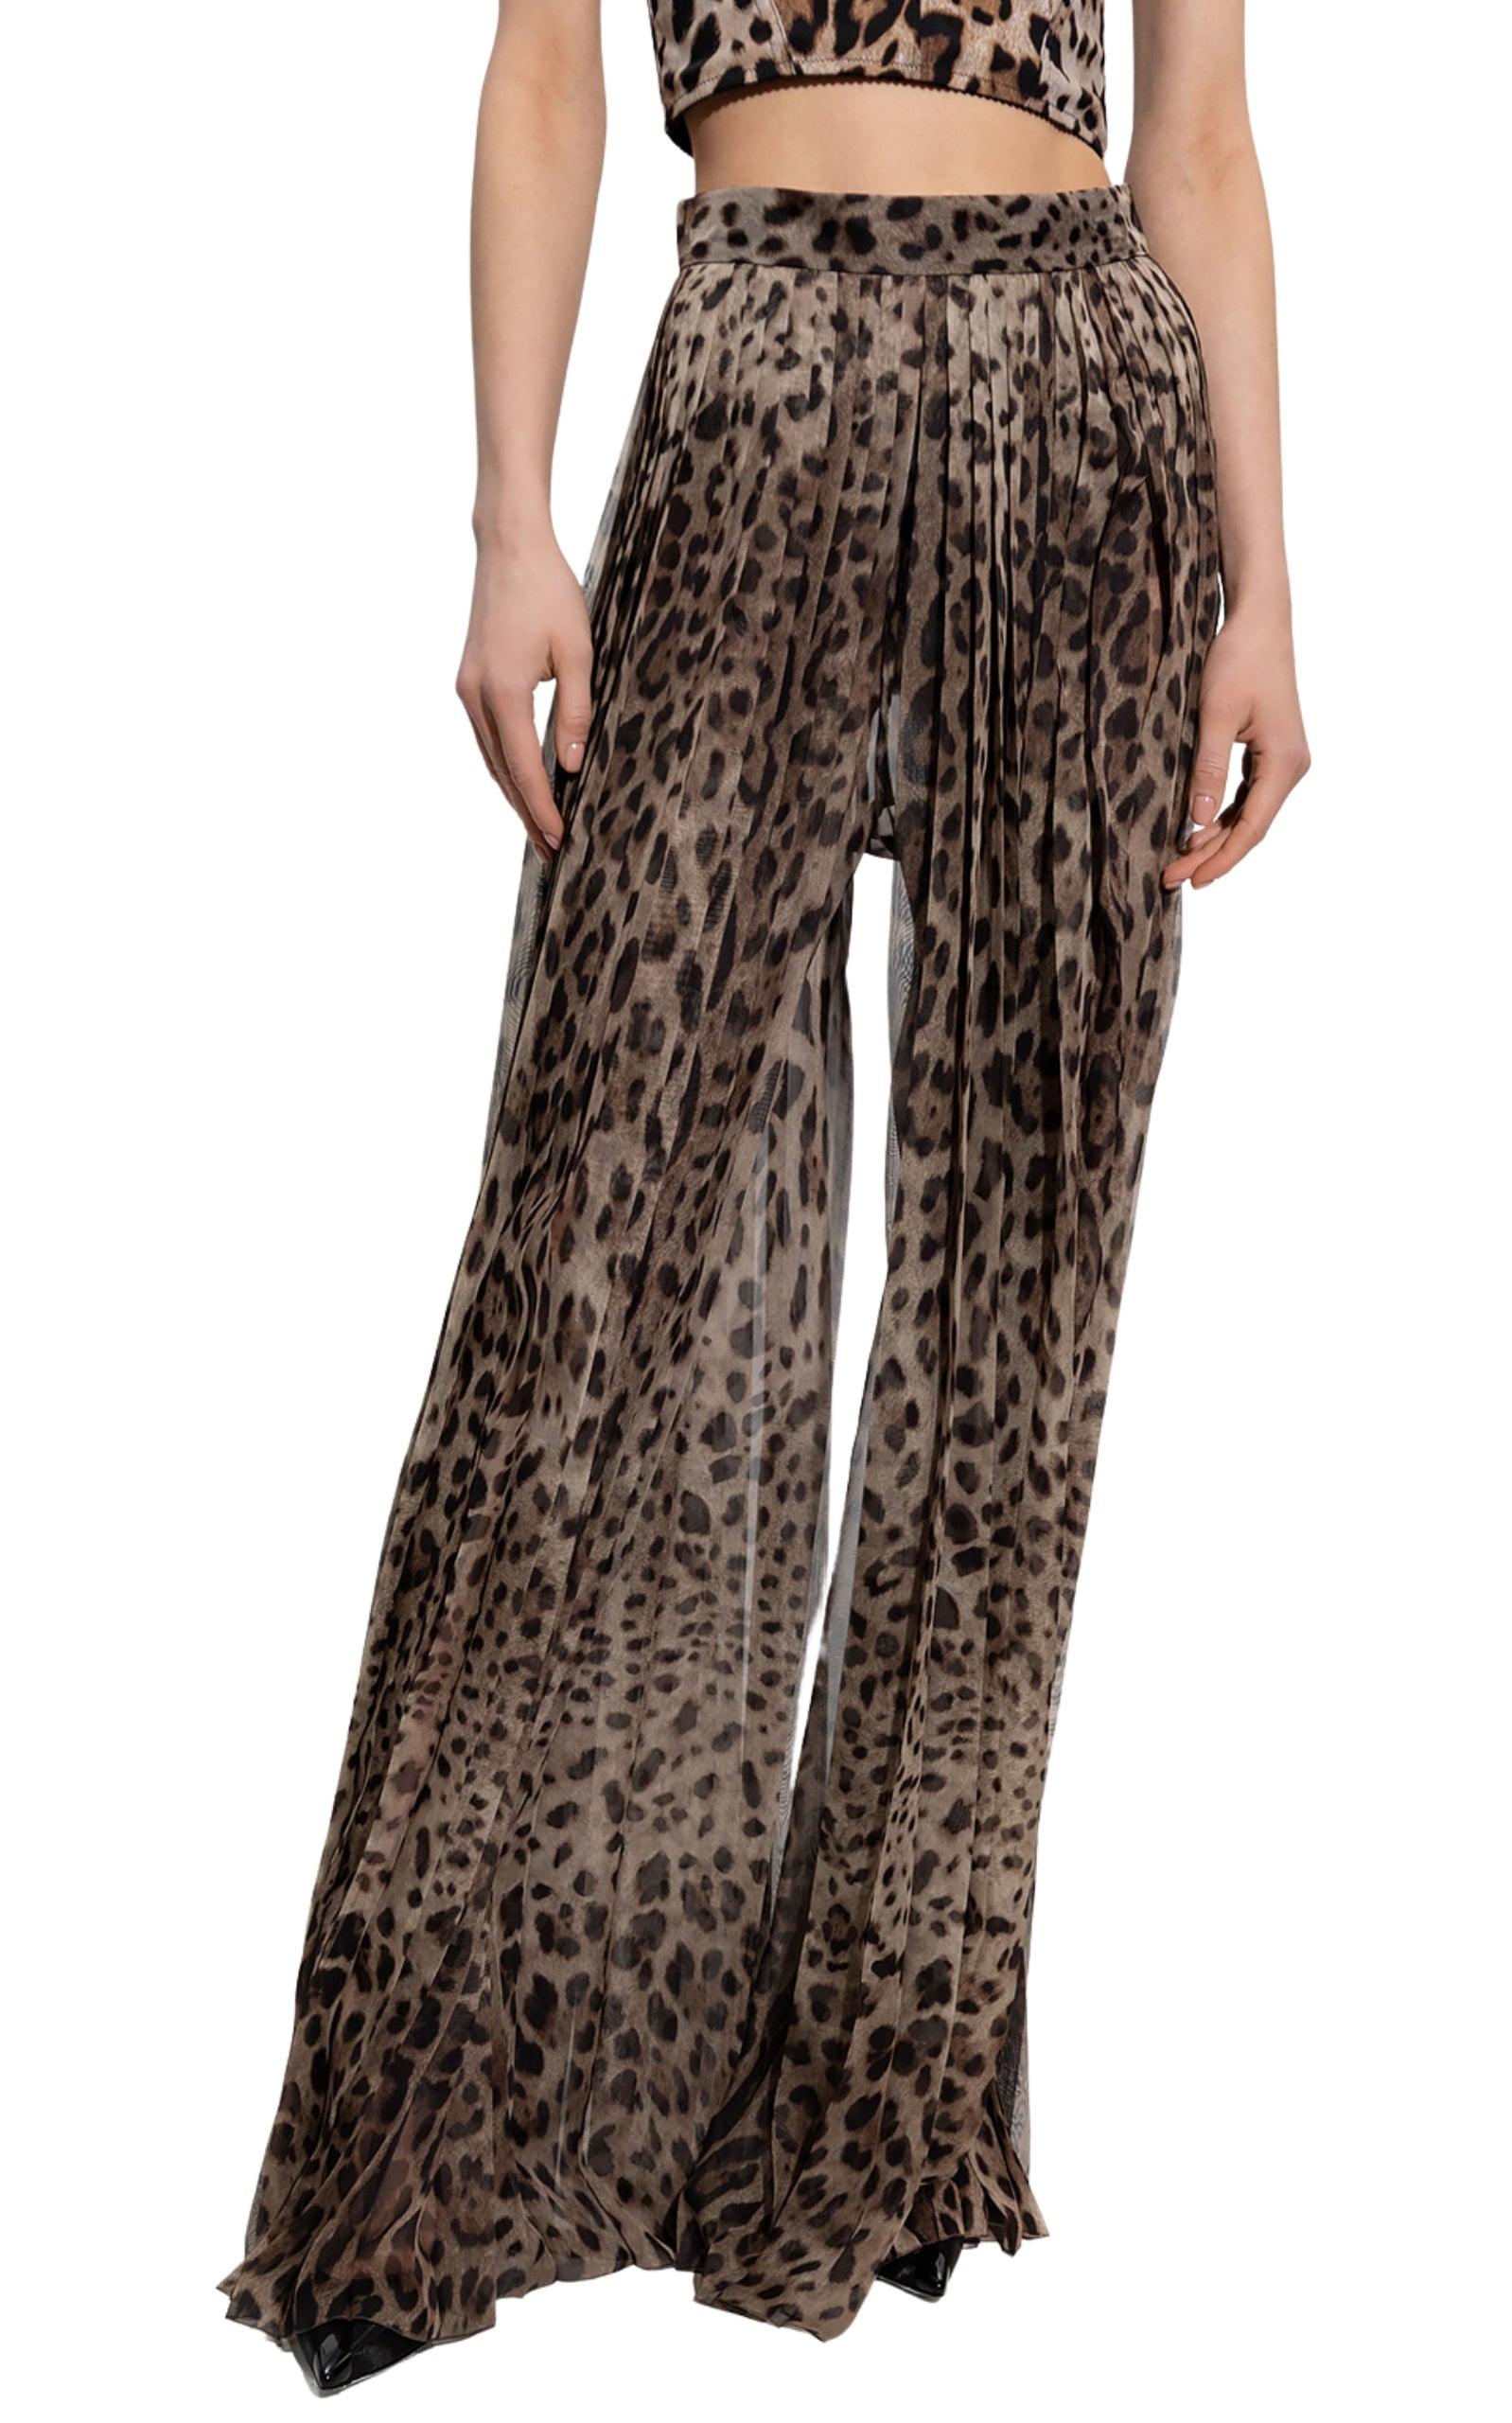 Leopard Palazzo Trousers | Women's Palazzo Trousers | For Loving You